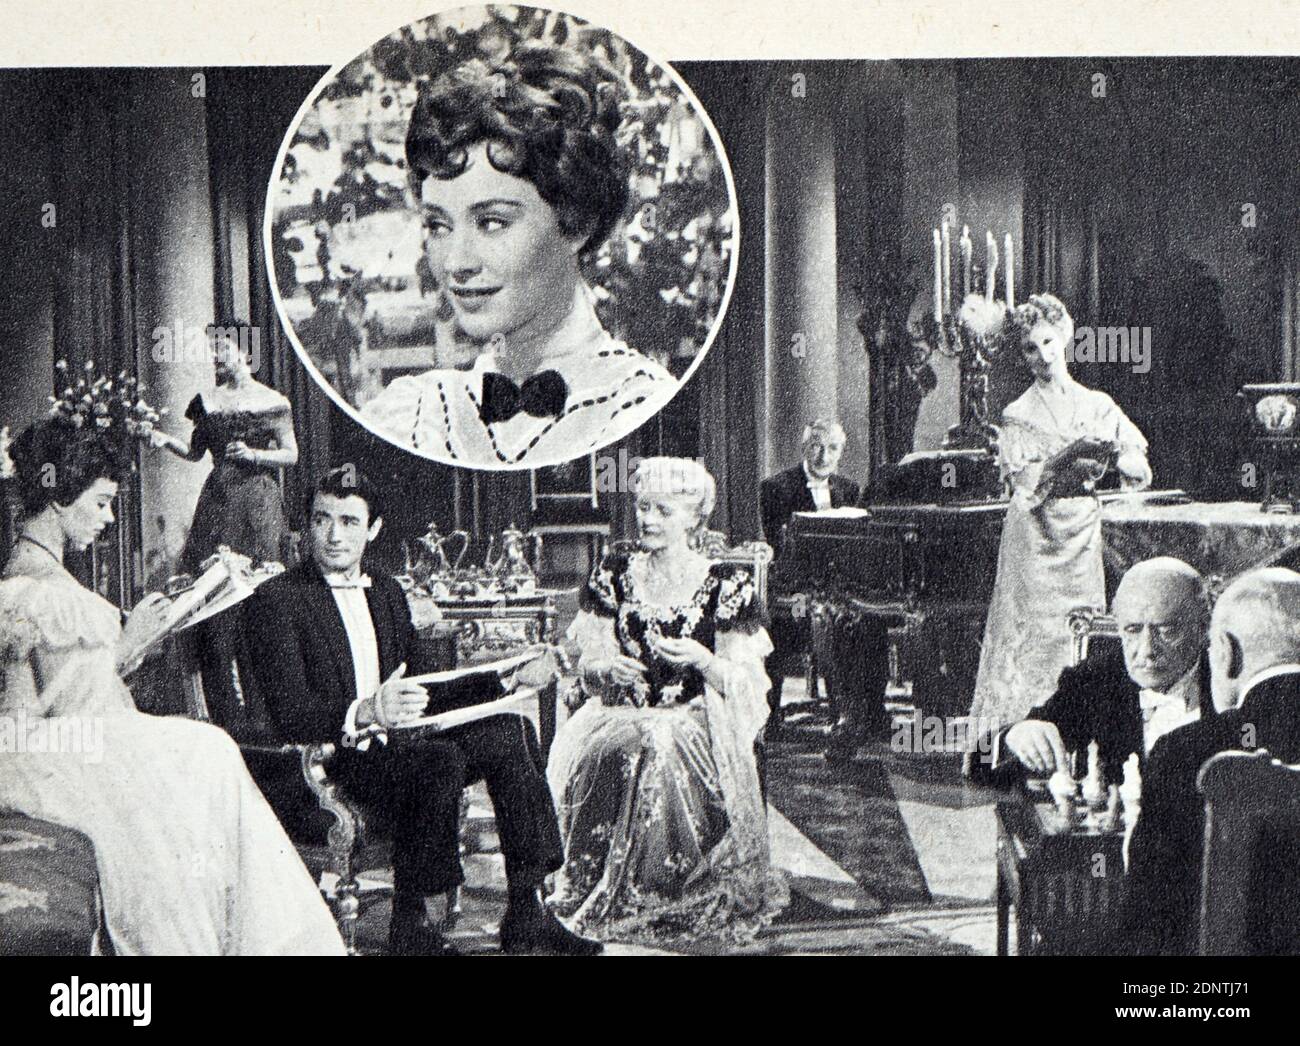 Film still from 'The Million Pound Note' starring Gregory Peck, Roland Squire, Joyce Grenfell, and Wilfrid Hyde-White. Stock Photo